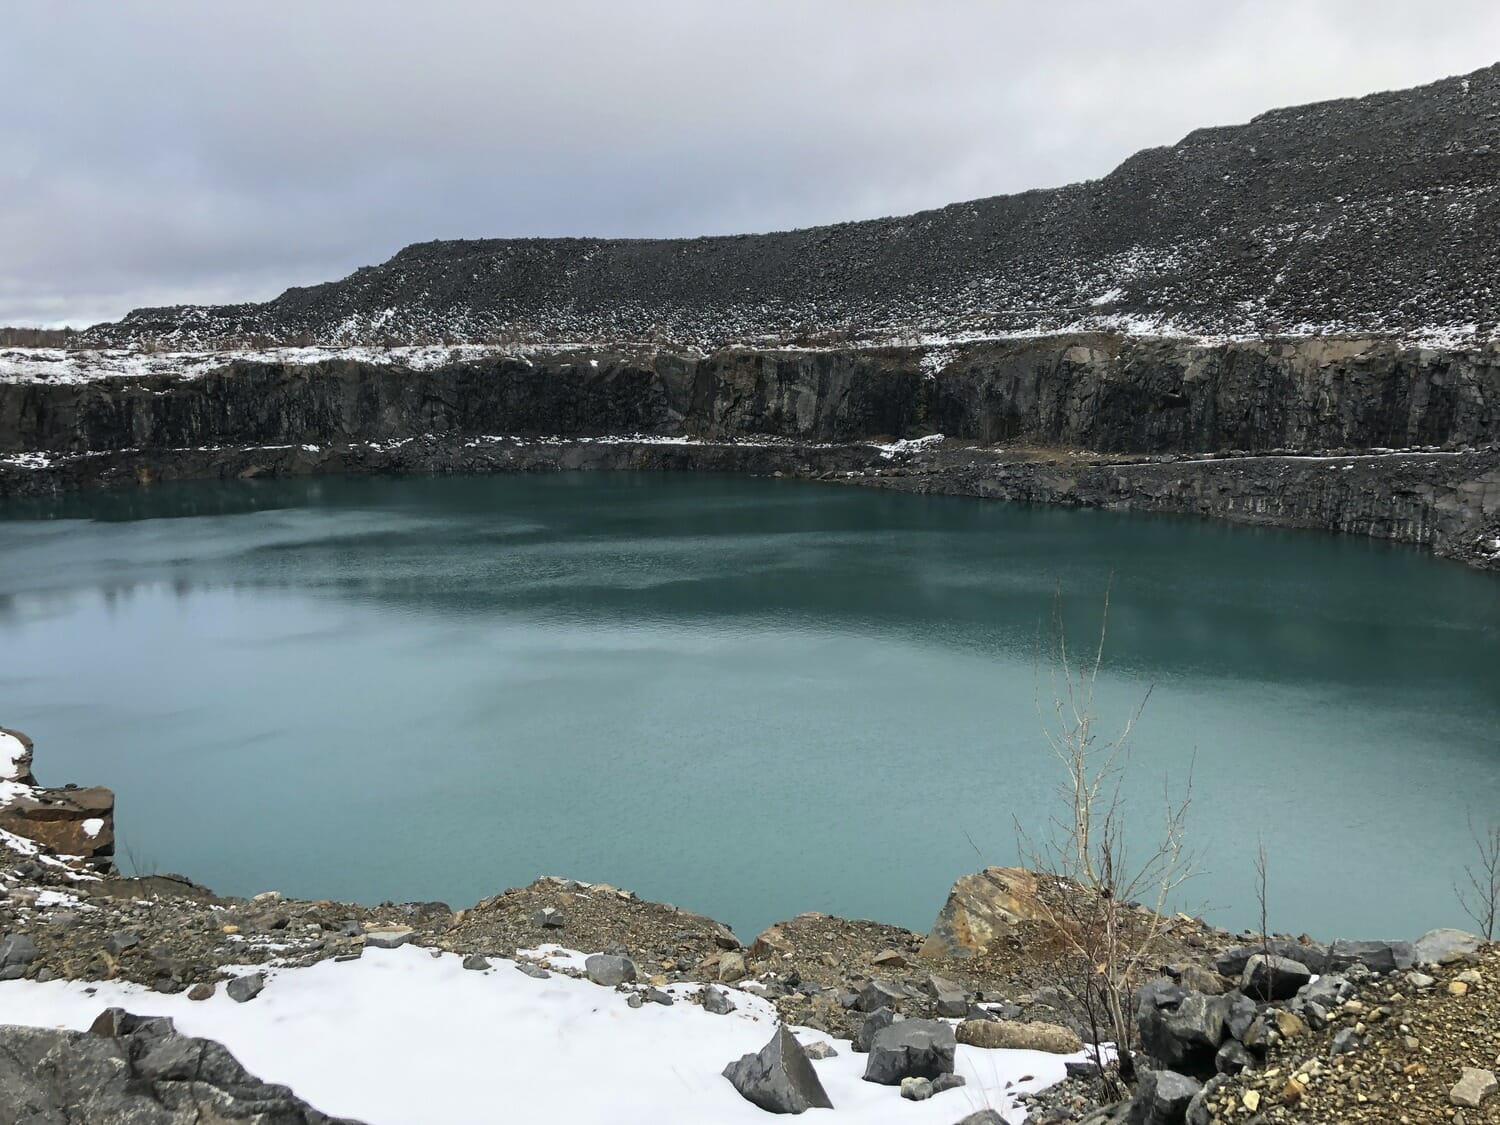 A blue lake in the middle of a rocky area.